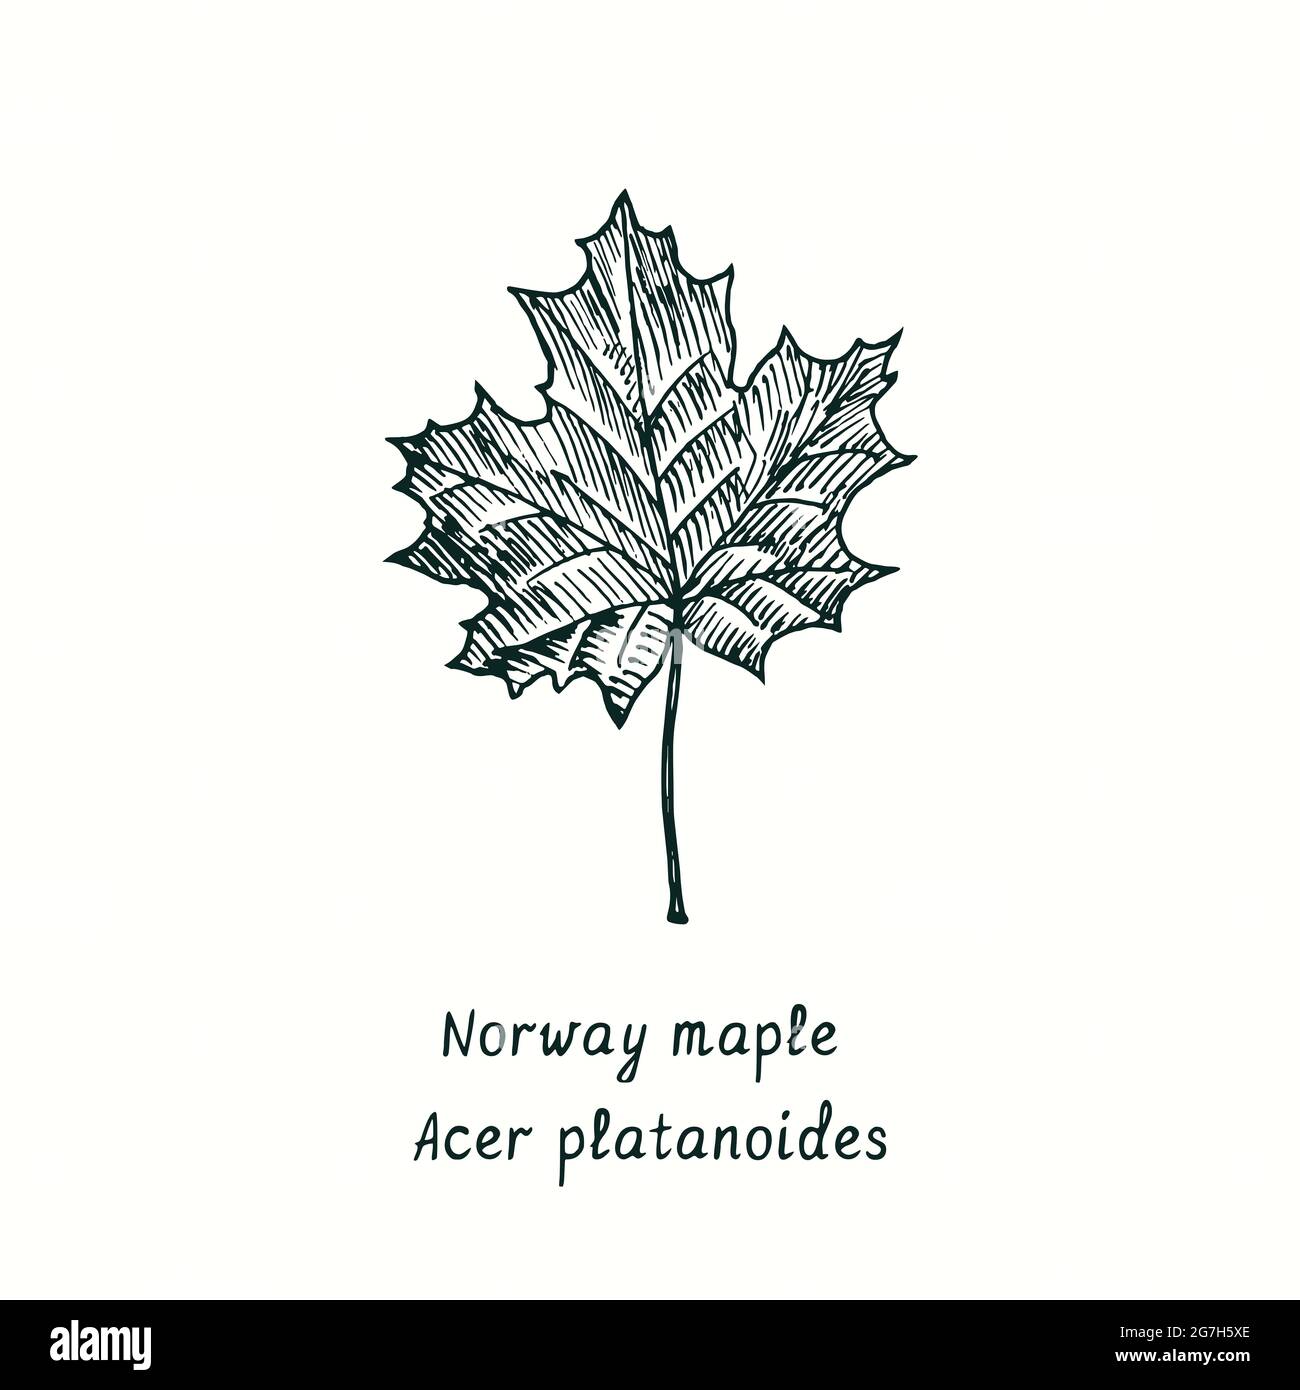 Norway maple (Acer platanoides) leaf. Ink black and white doodle drawing in woodcut style. Stock Photo